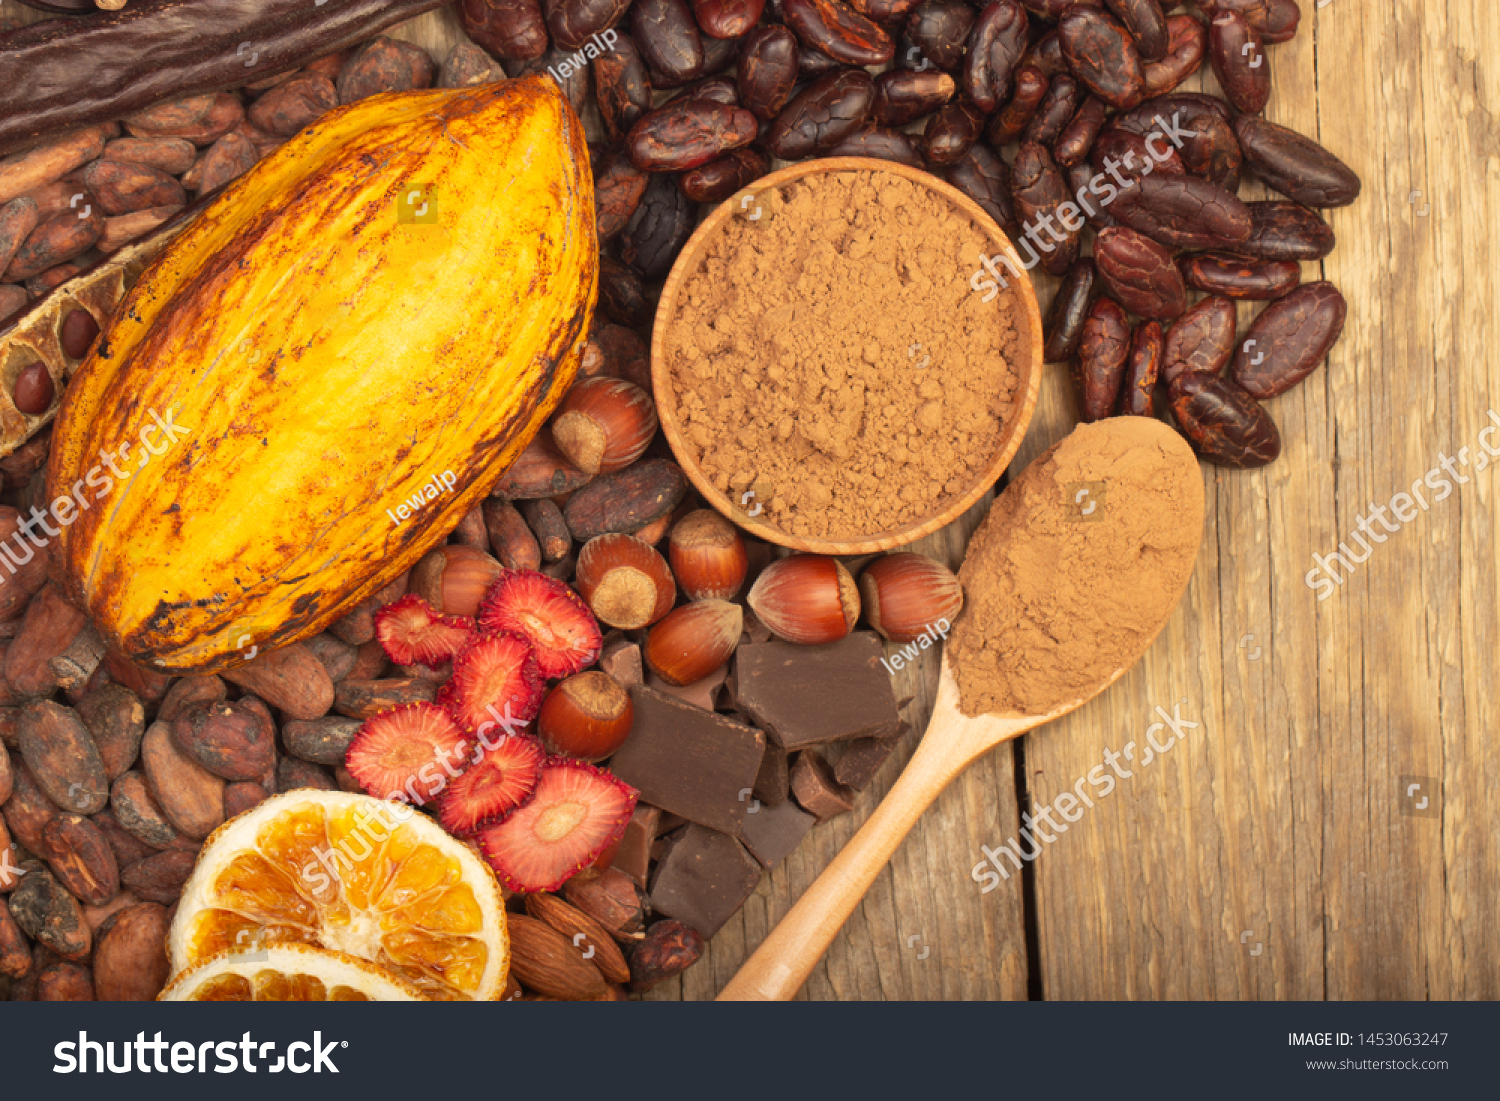 cacao pods, carob pods and dried fruits on wooden background #1453063247